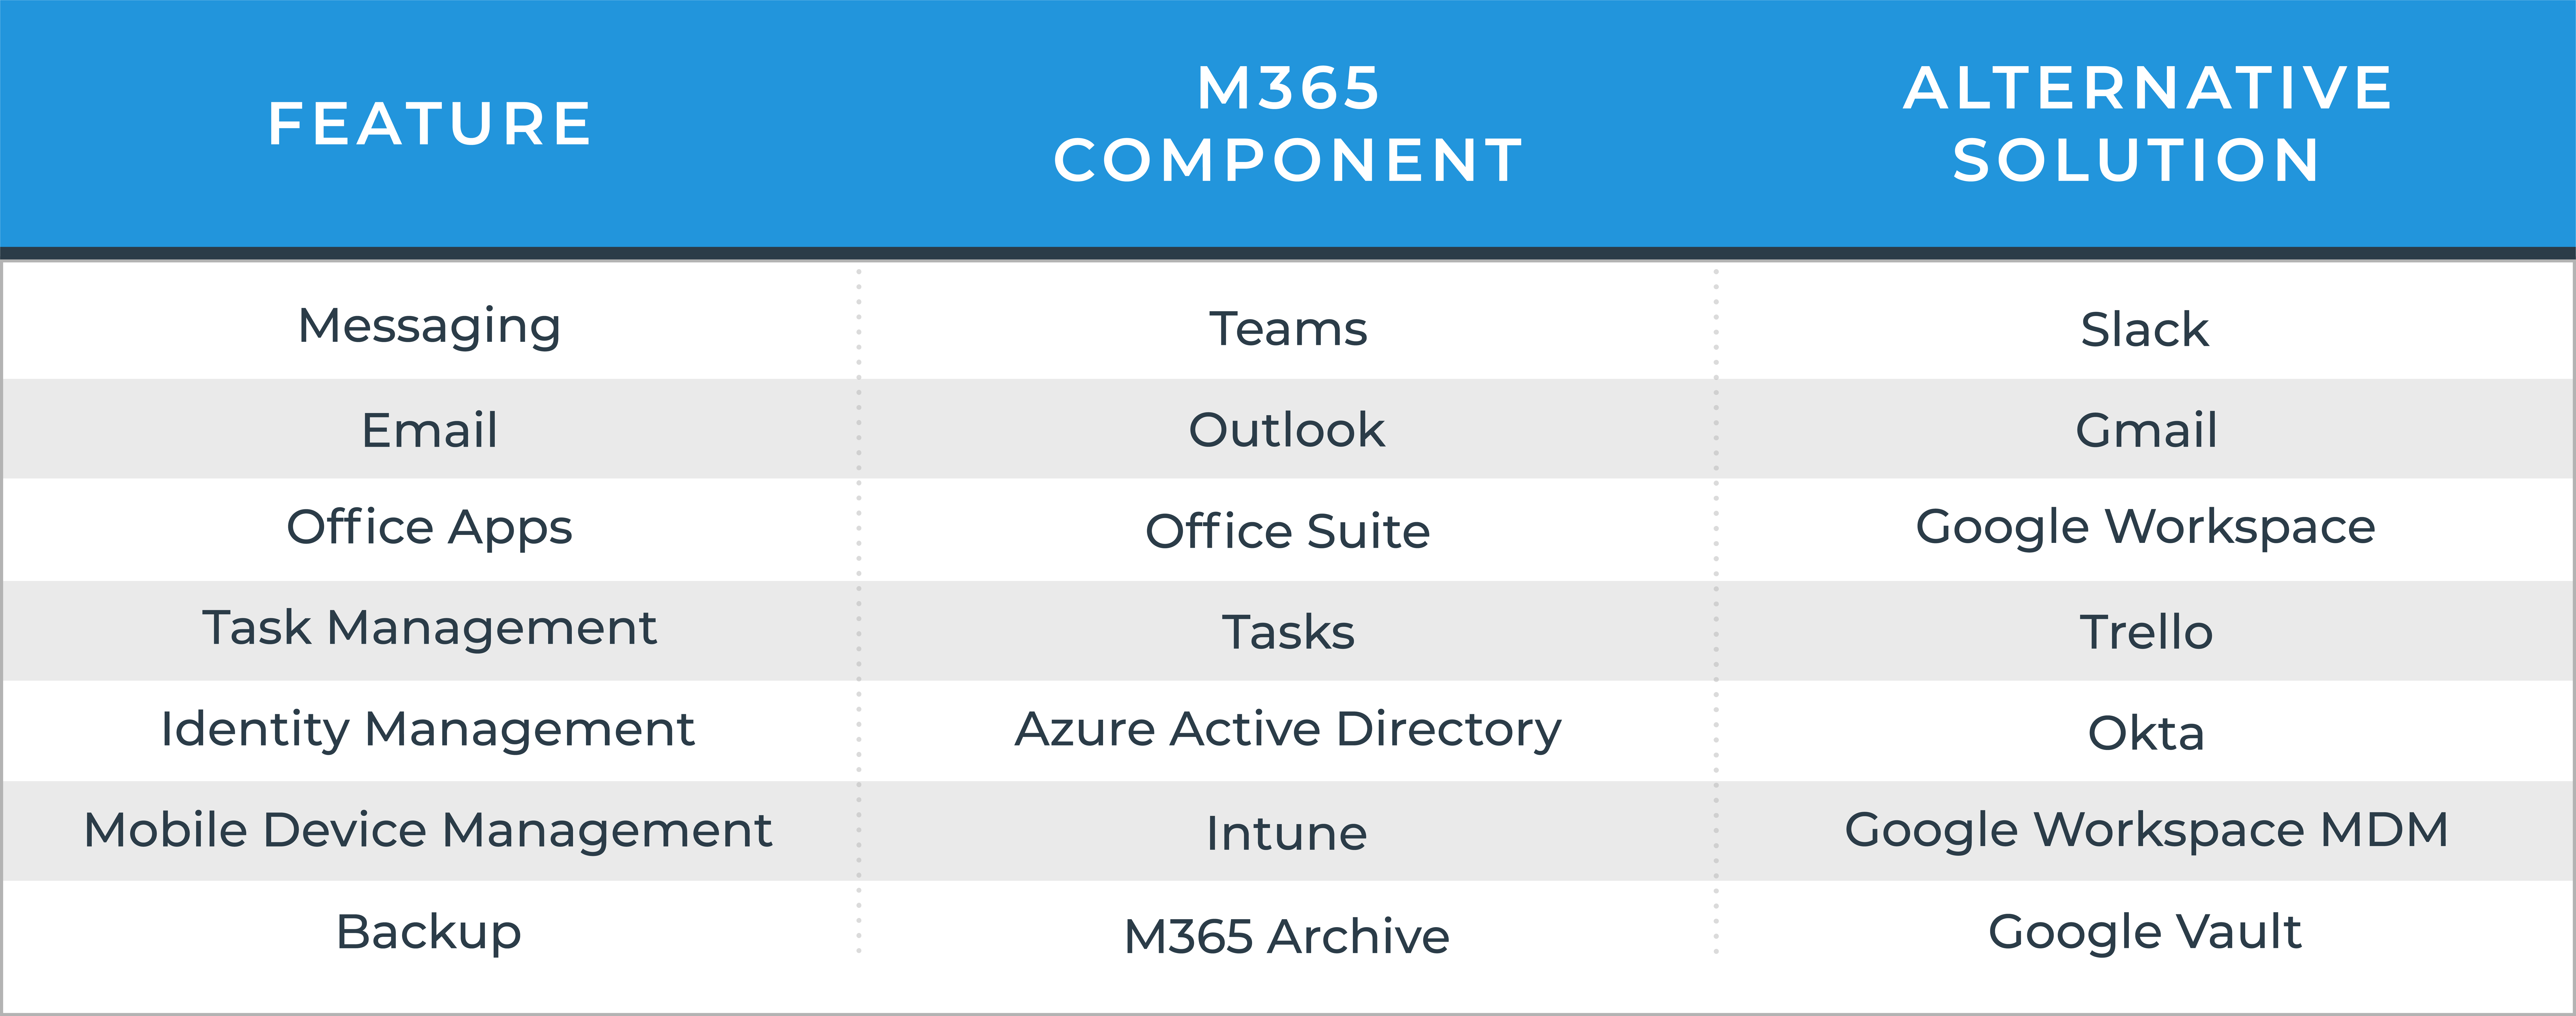 Table representing the key differences between Microsoft 365 and Google